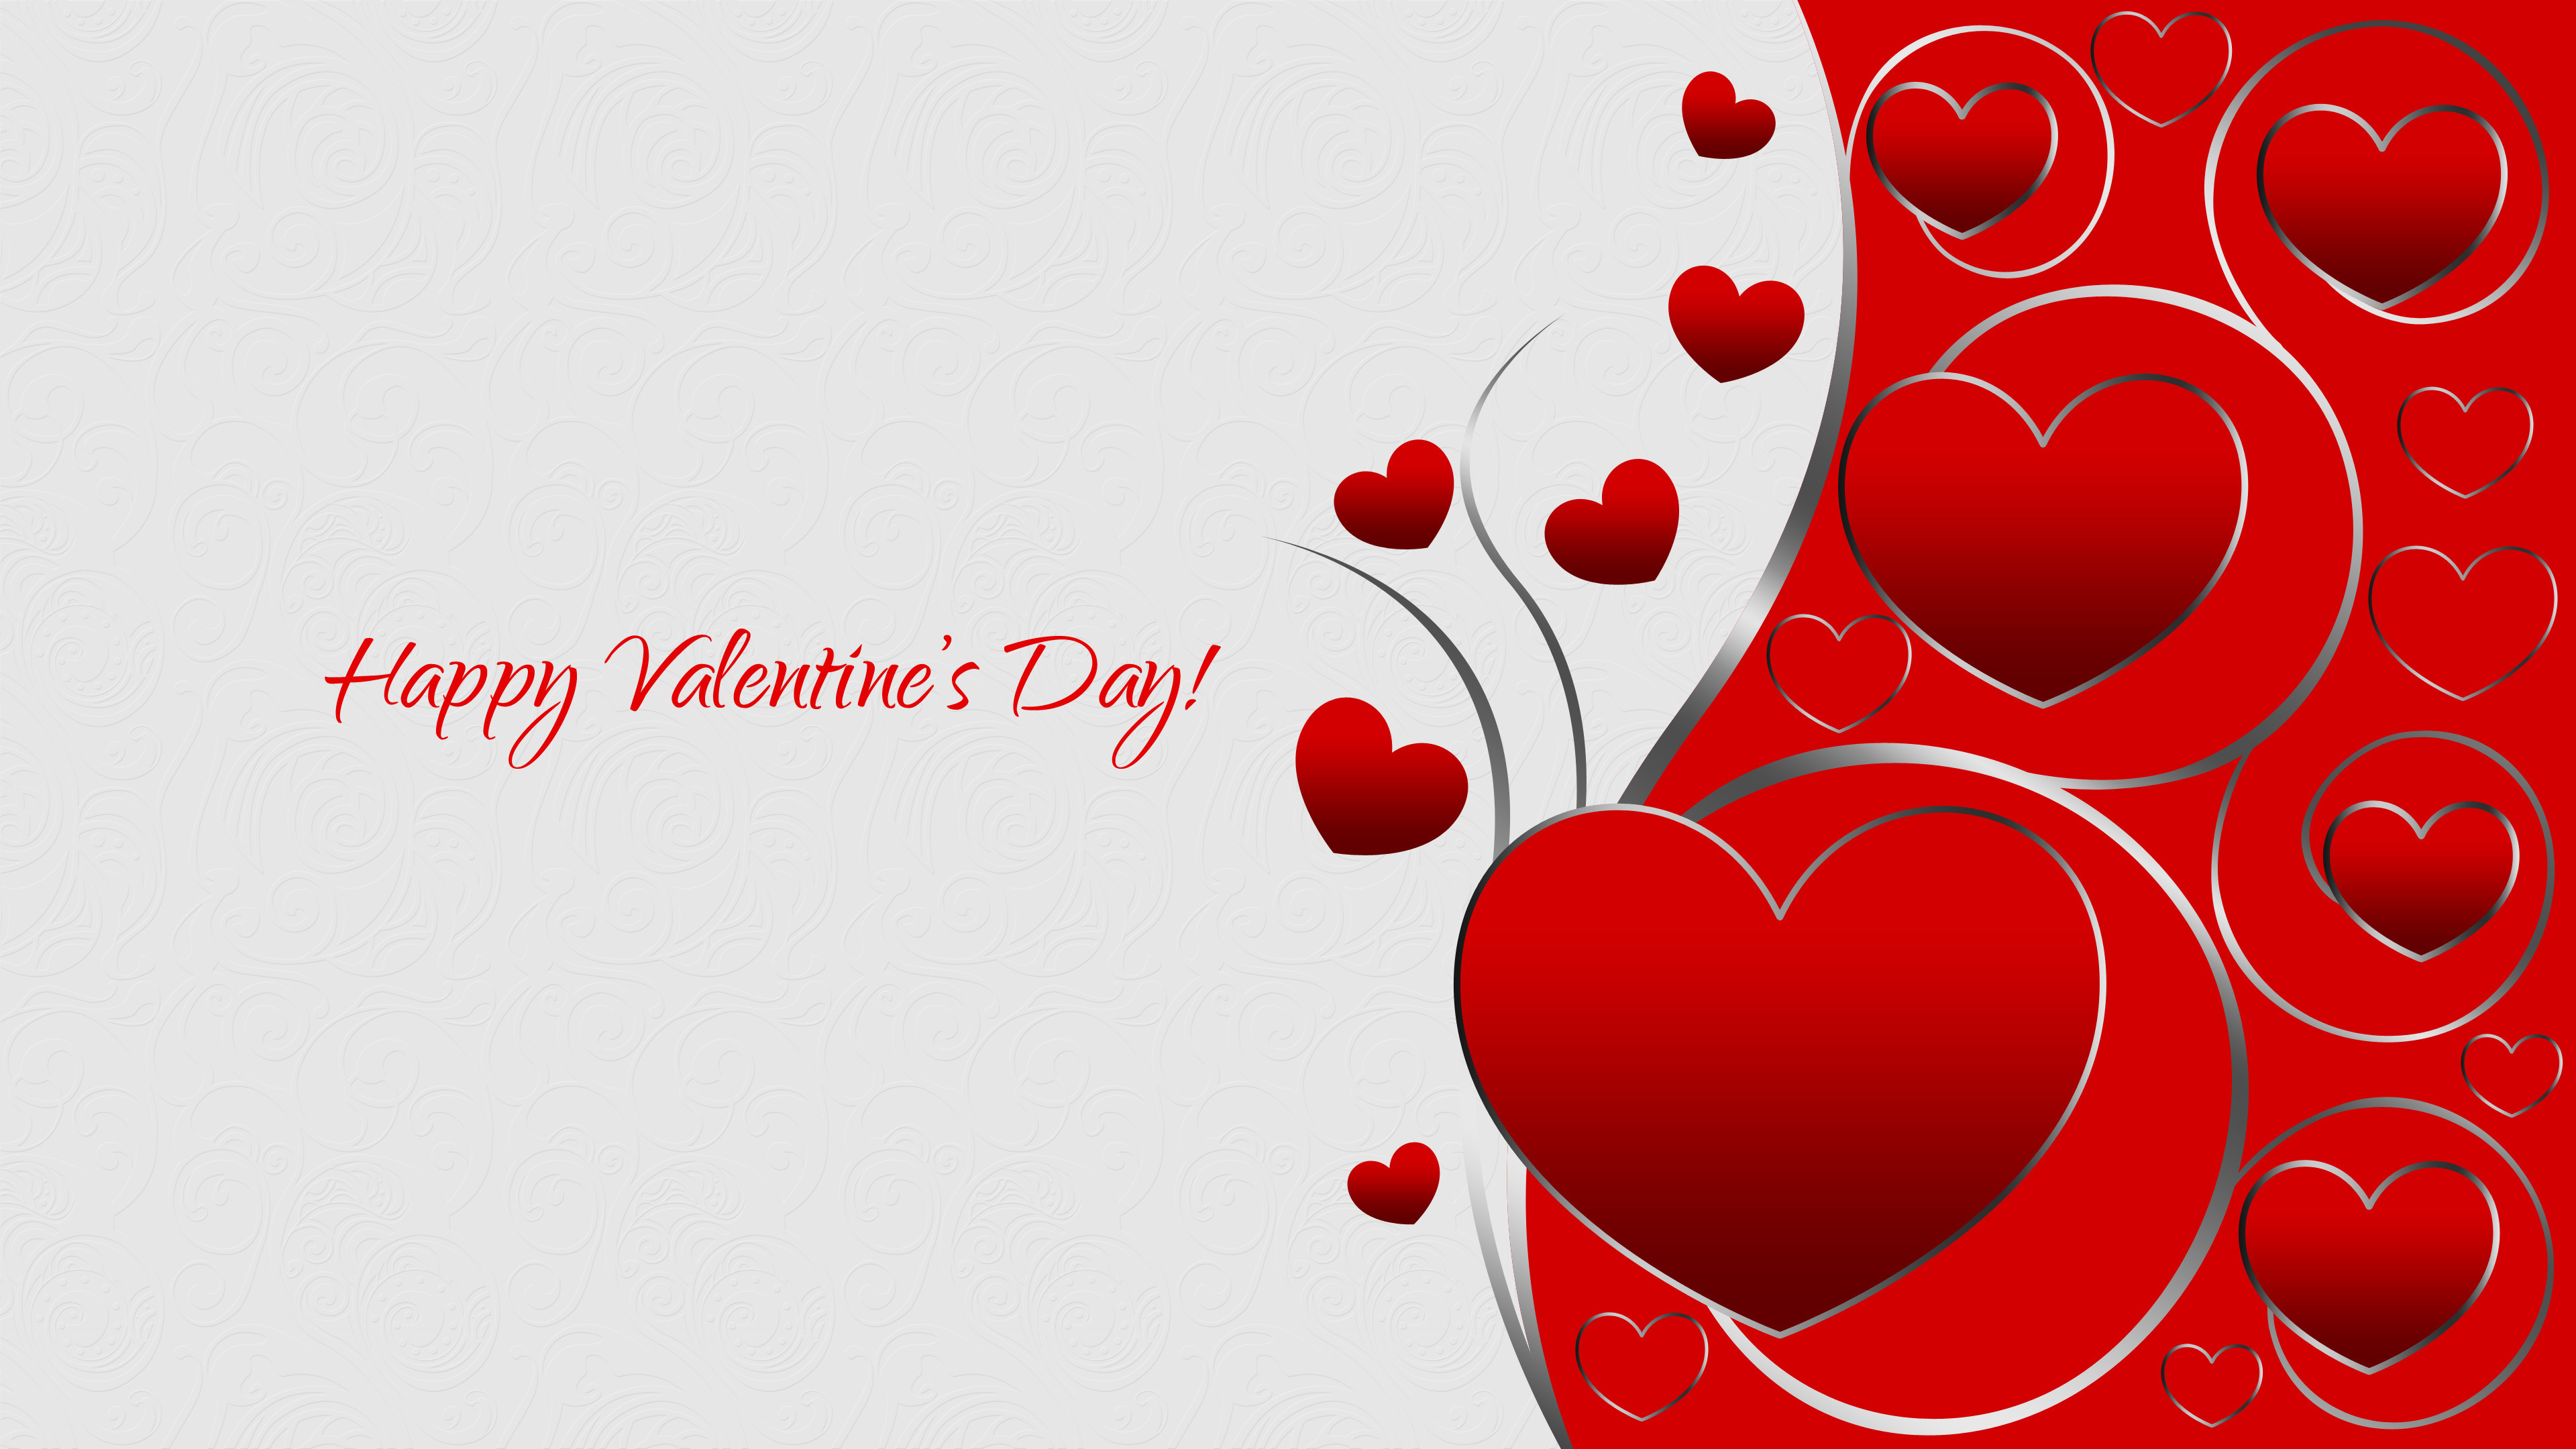 Valentine's Day Wallpapers Images Photos Pictures Backgrounds